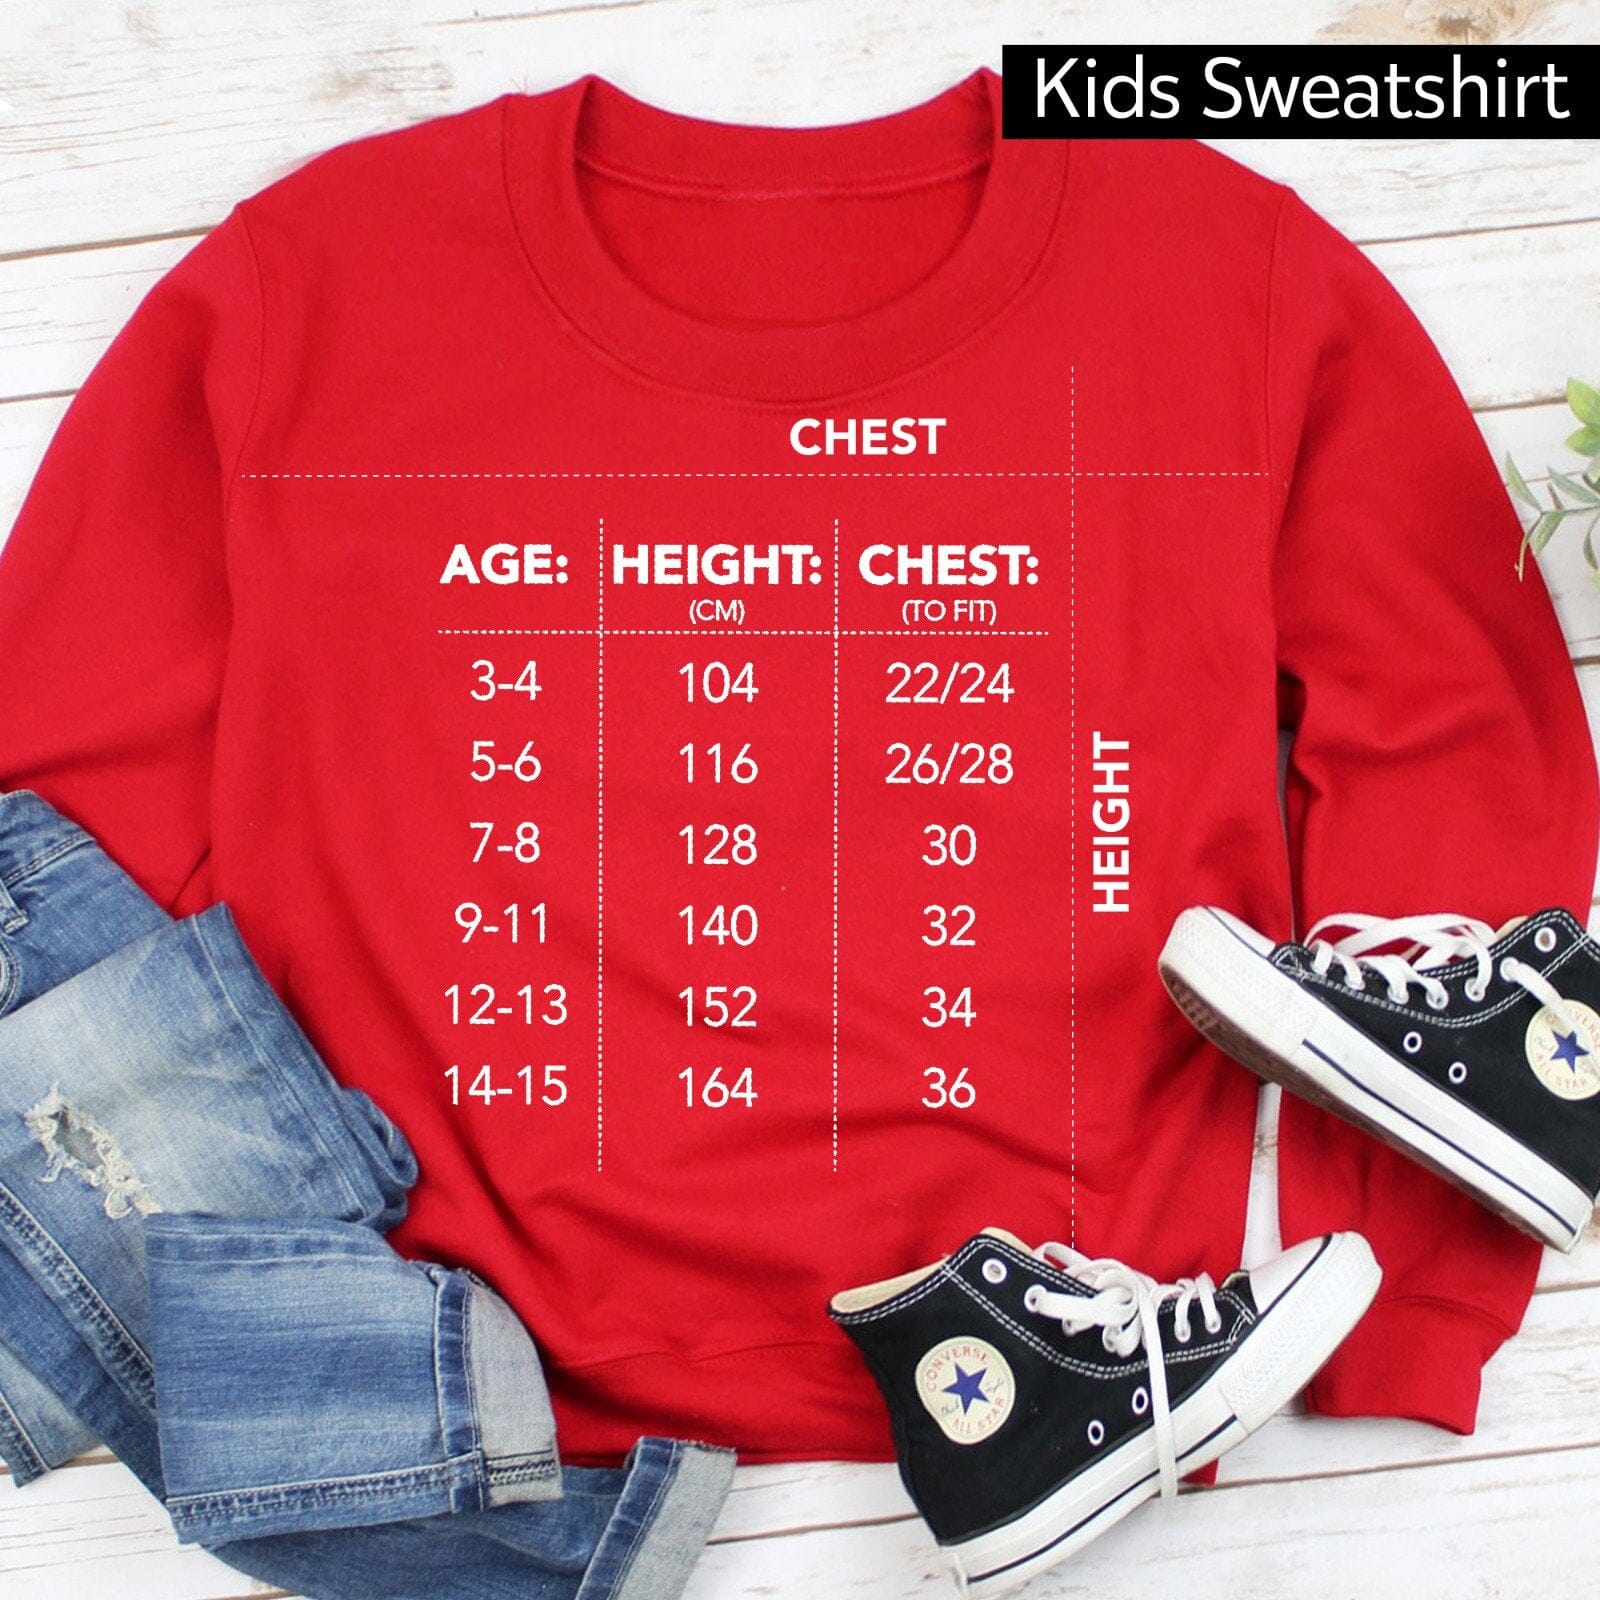 Merry Christmas Puff Print Jumper 3D Letters Unisex Adult & Kids Sizes Jumpers Xmas For Women Girl Sweatshirt